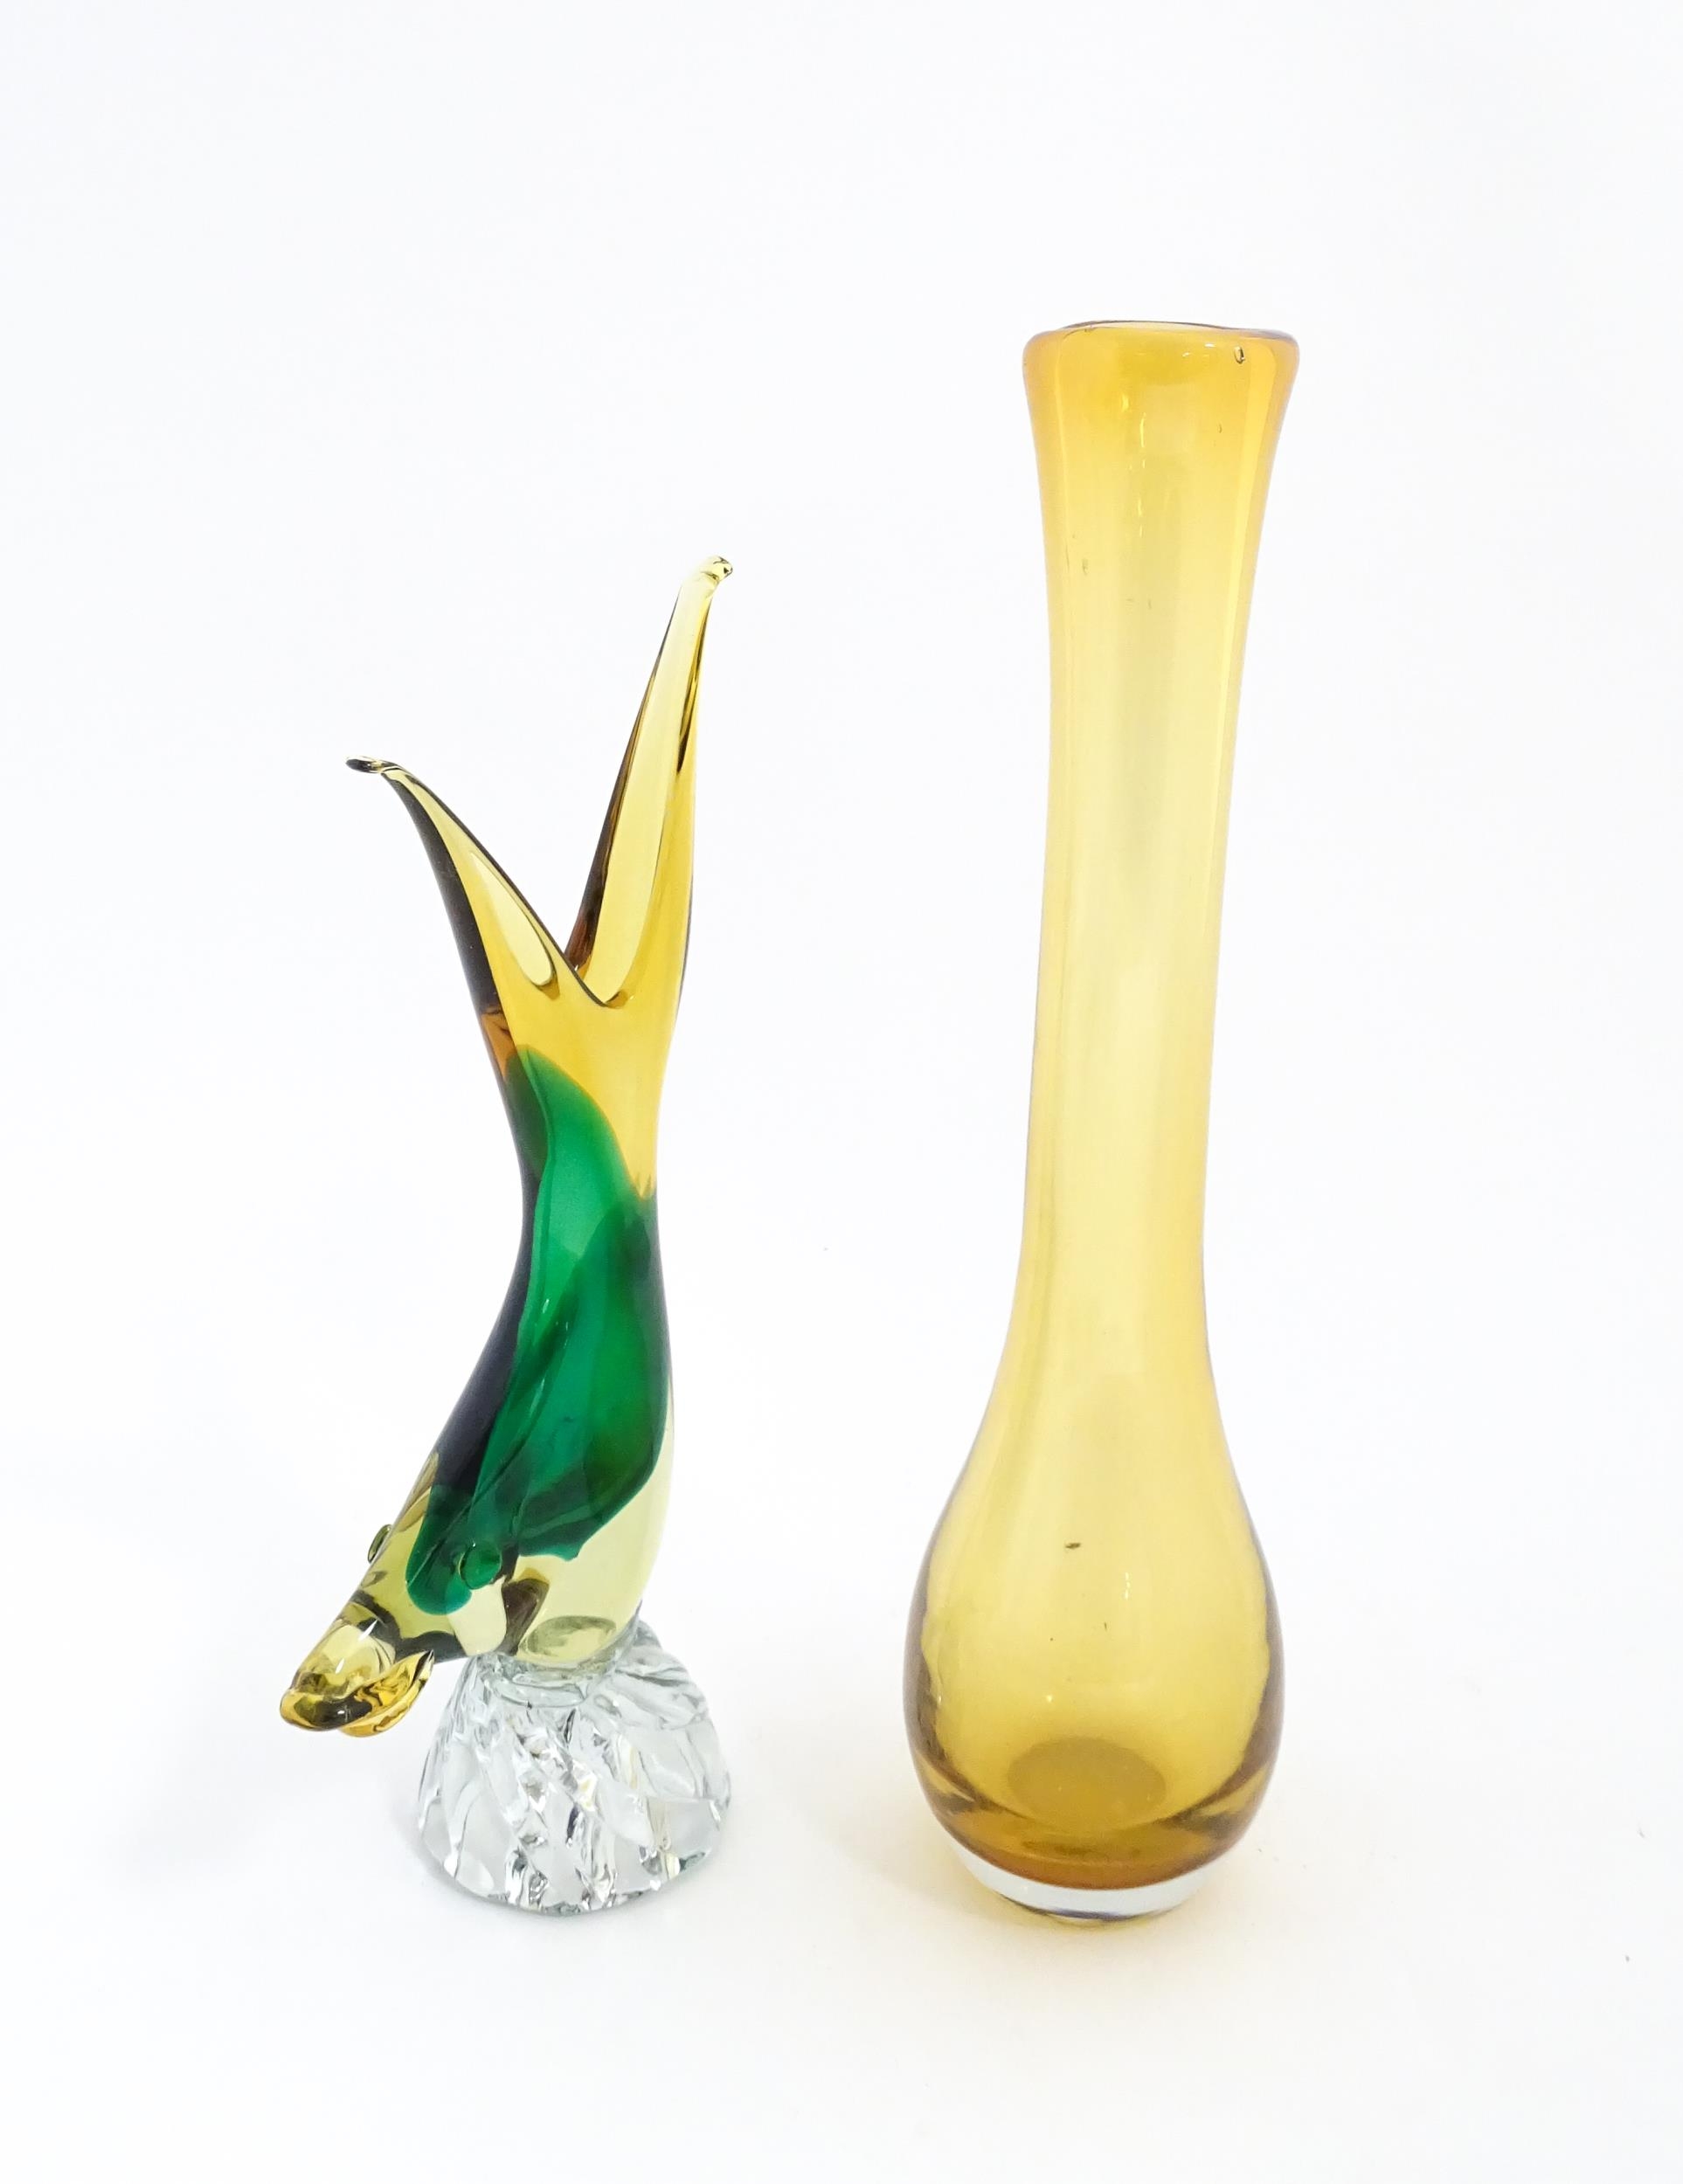 A Murano style glass vase modelled as a fish. Together with a studio glass vase of elongated form. - Image 5 of 7